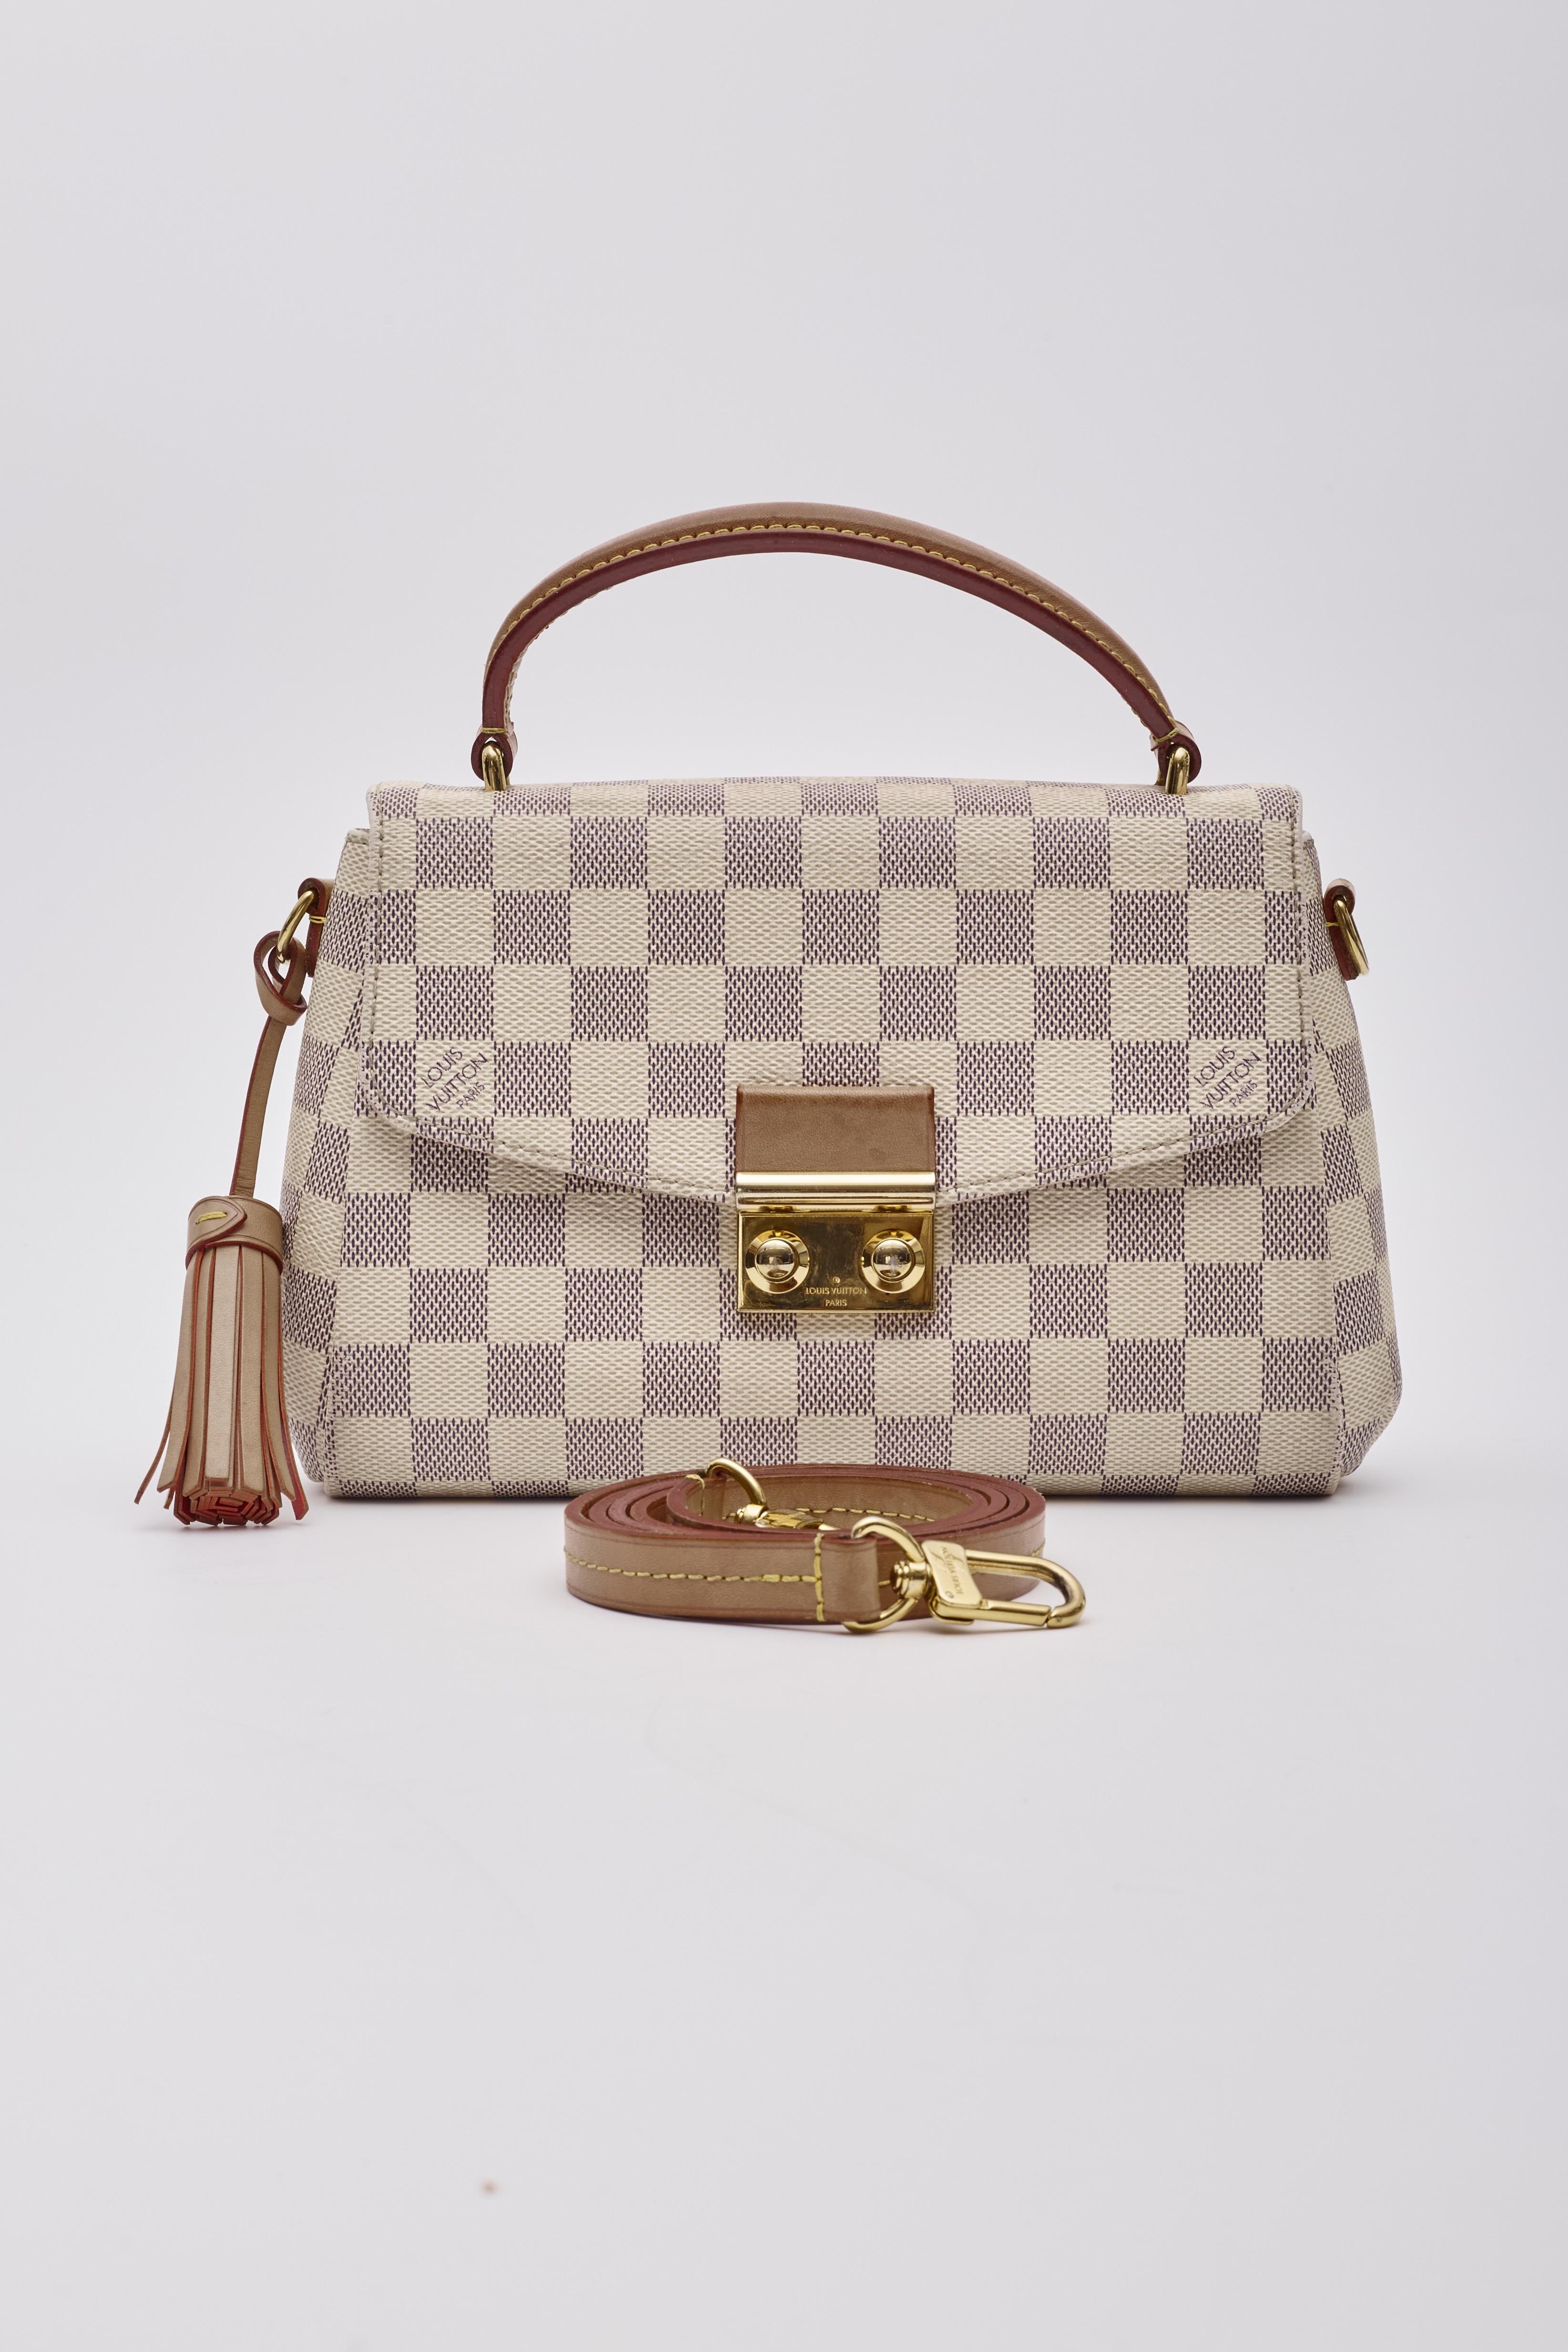 This compact bag is made of Louis Vuitton coated canvas in Damier azur. The bag features signature vachetta cowhide leather trim including a top handle with a removable tassel, and an optional shoulder strap with brass hardware. The crossover flap